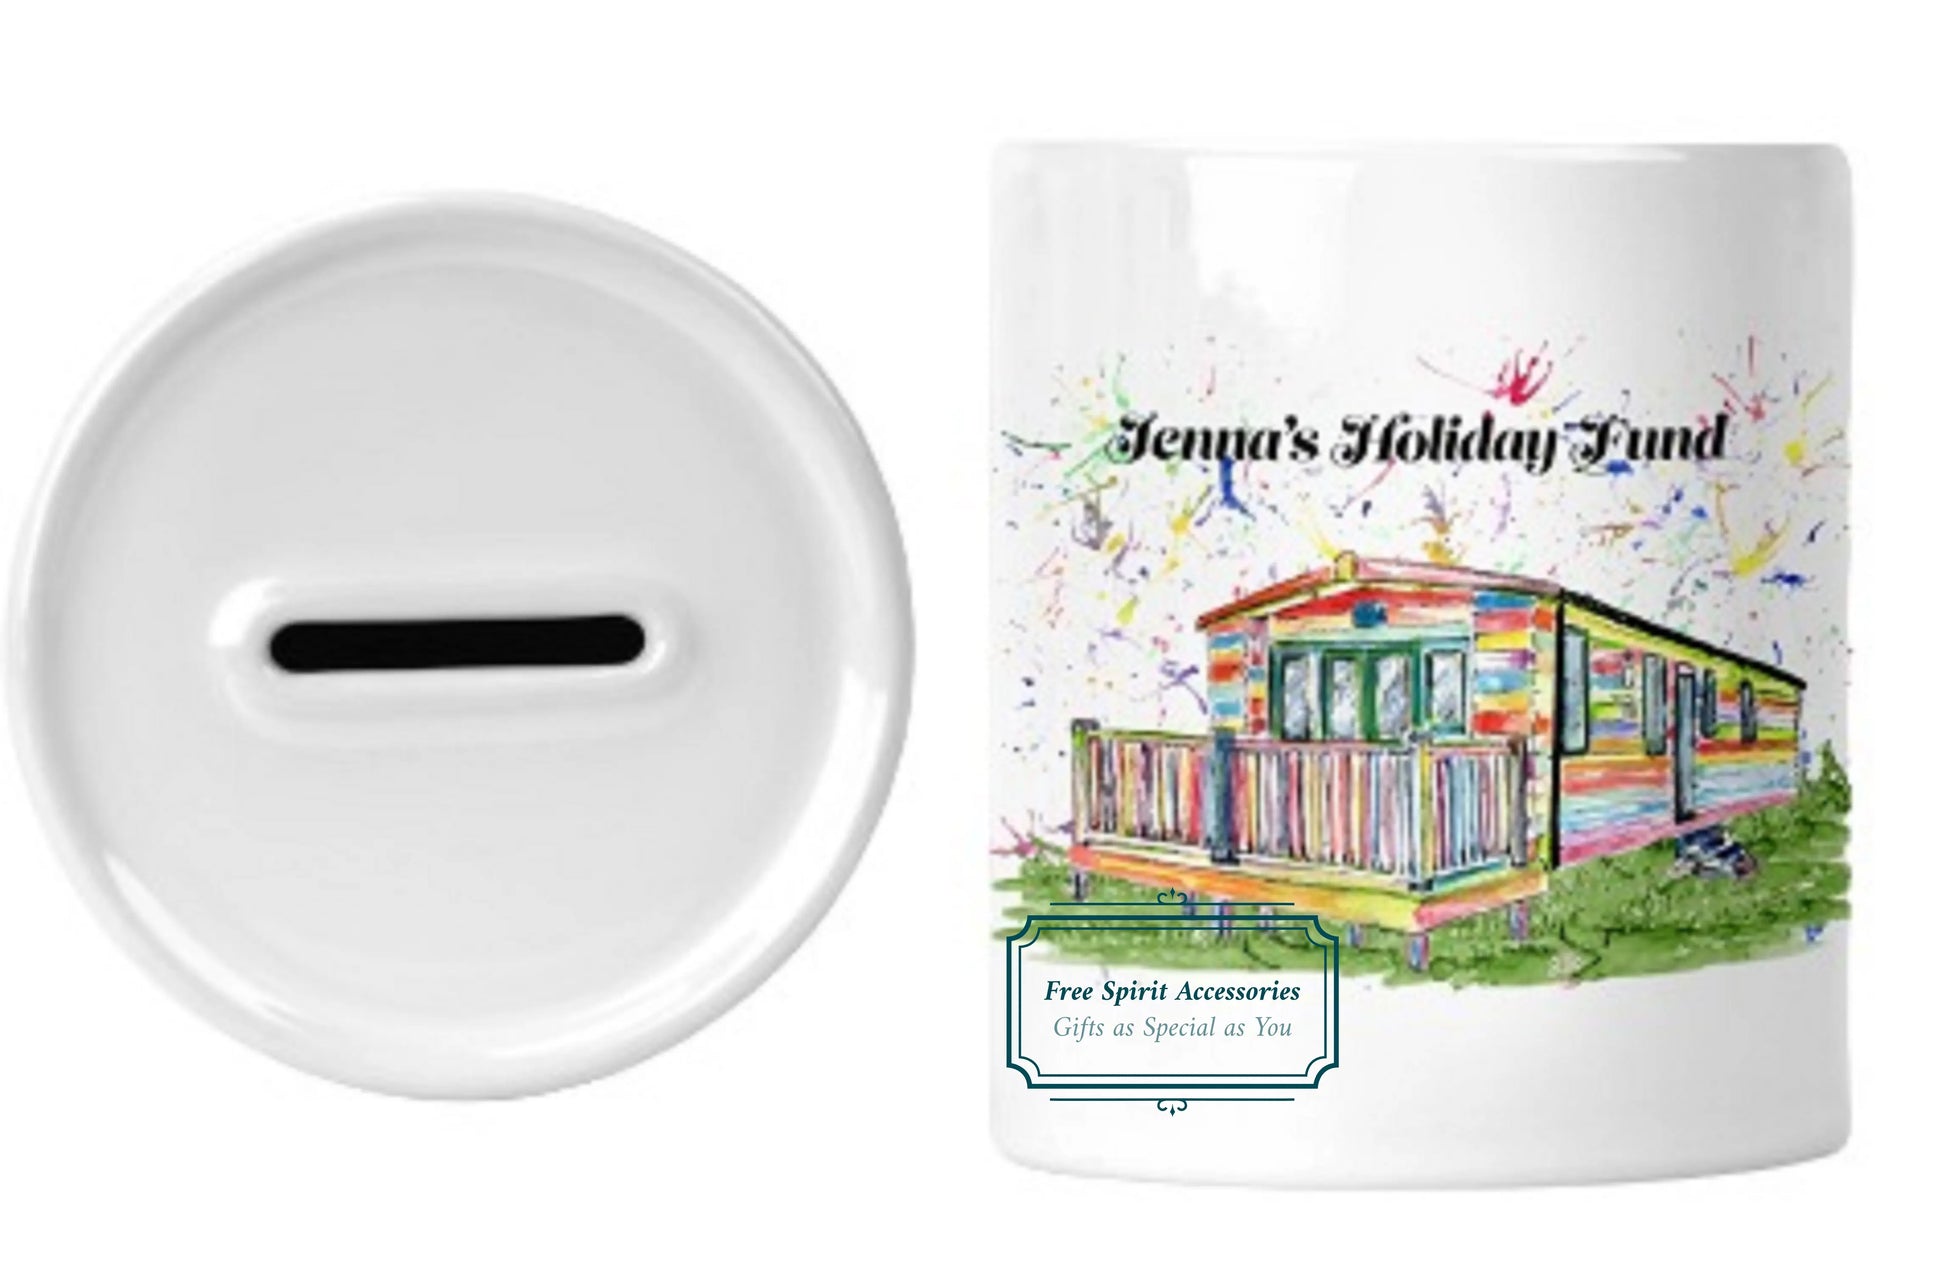  Your Perfect Personalised Static Caravan Holiday Fund Reuseable Money Box by Free Spirit Accessories sold by Free Spirit Accessories